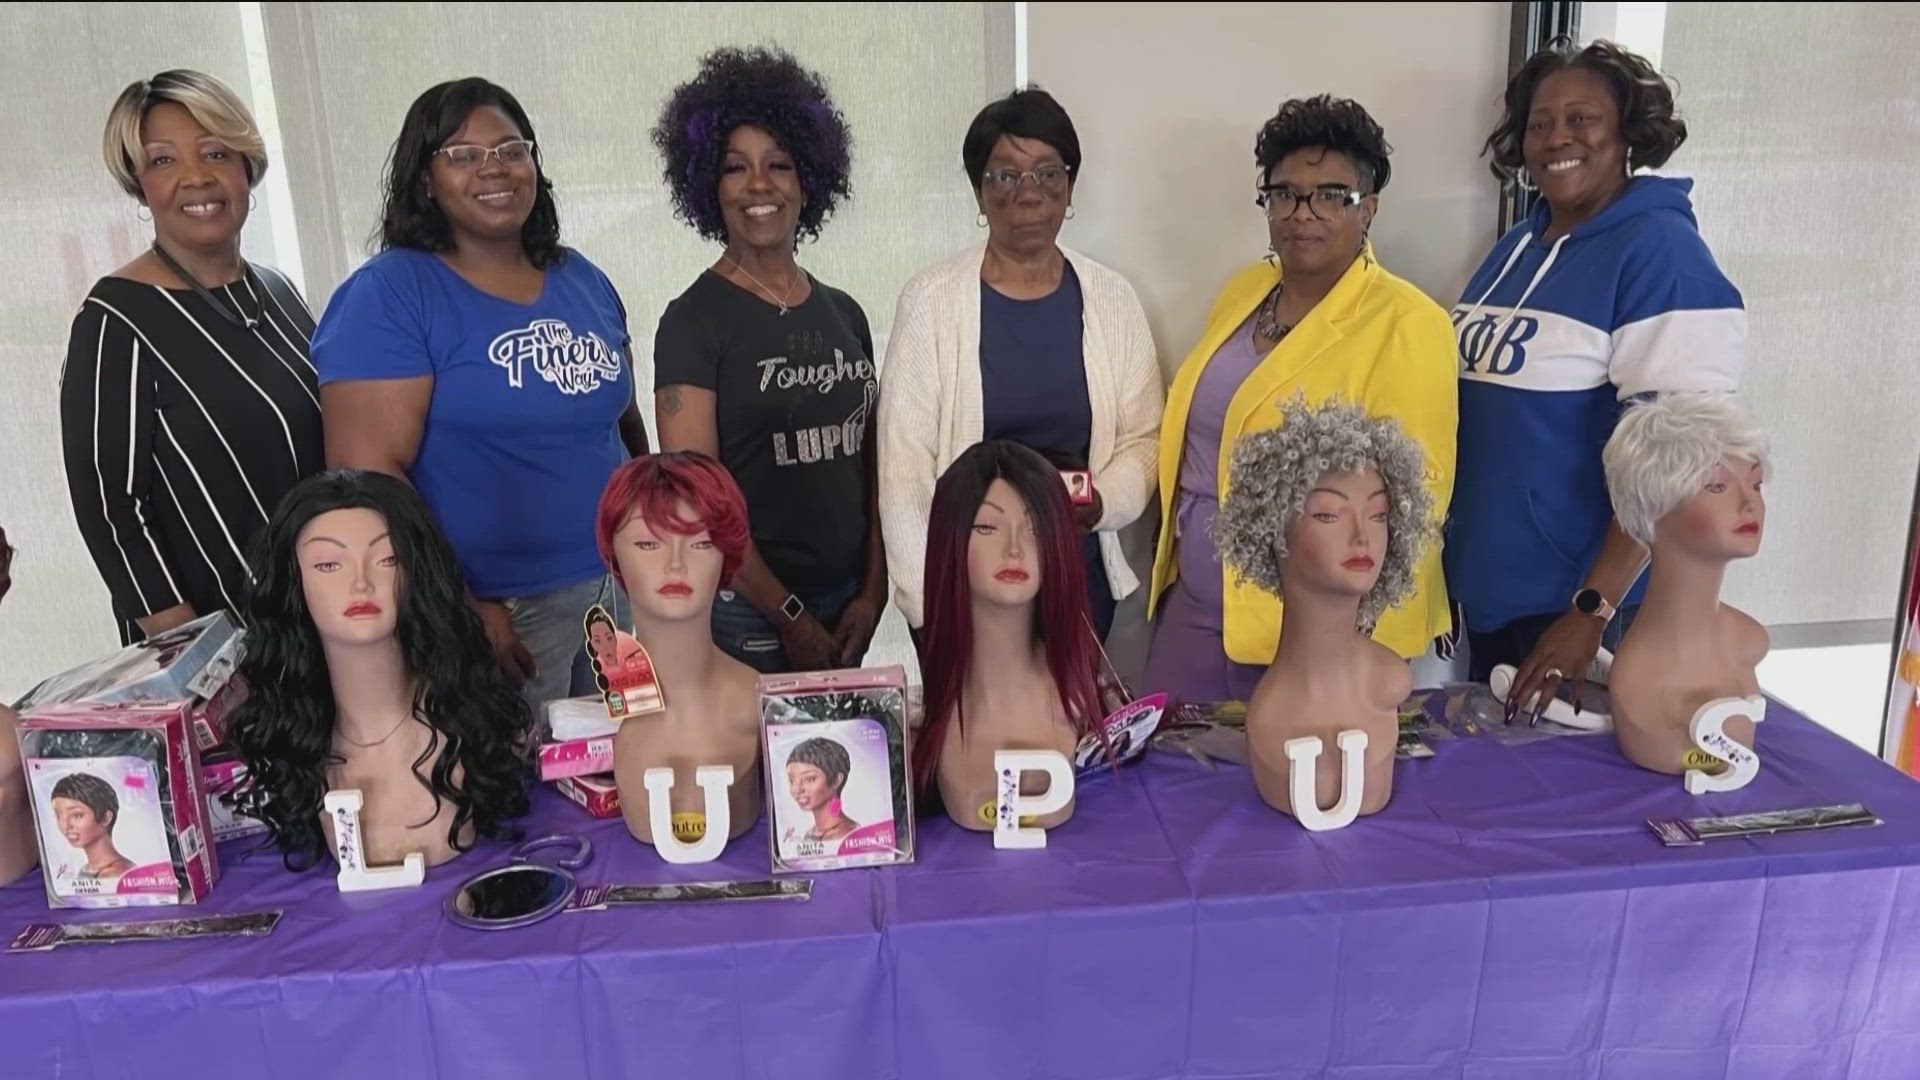 After surviving lupus herself, Rachelle Roy wanted to help others affected by the disease by organizing a community effort to collect wigs.